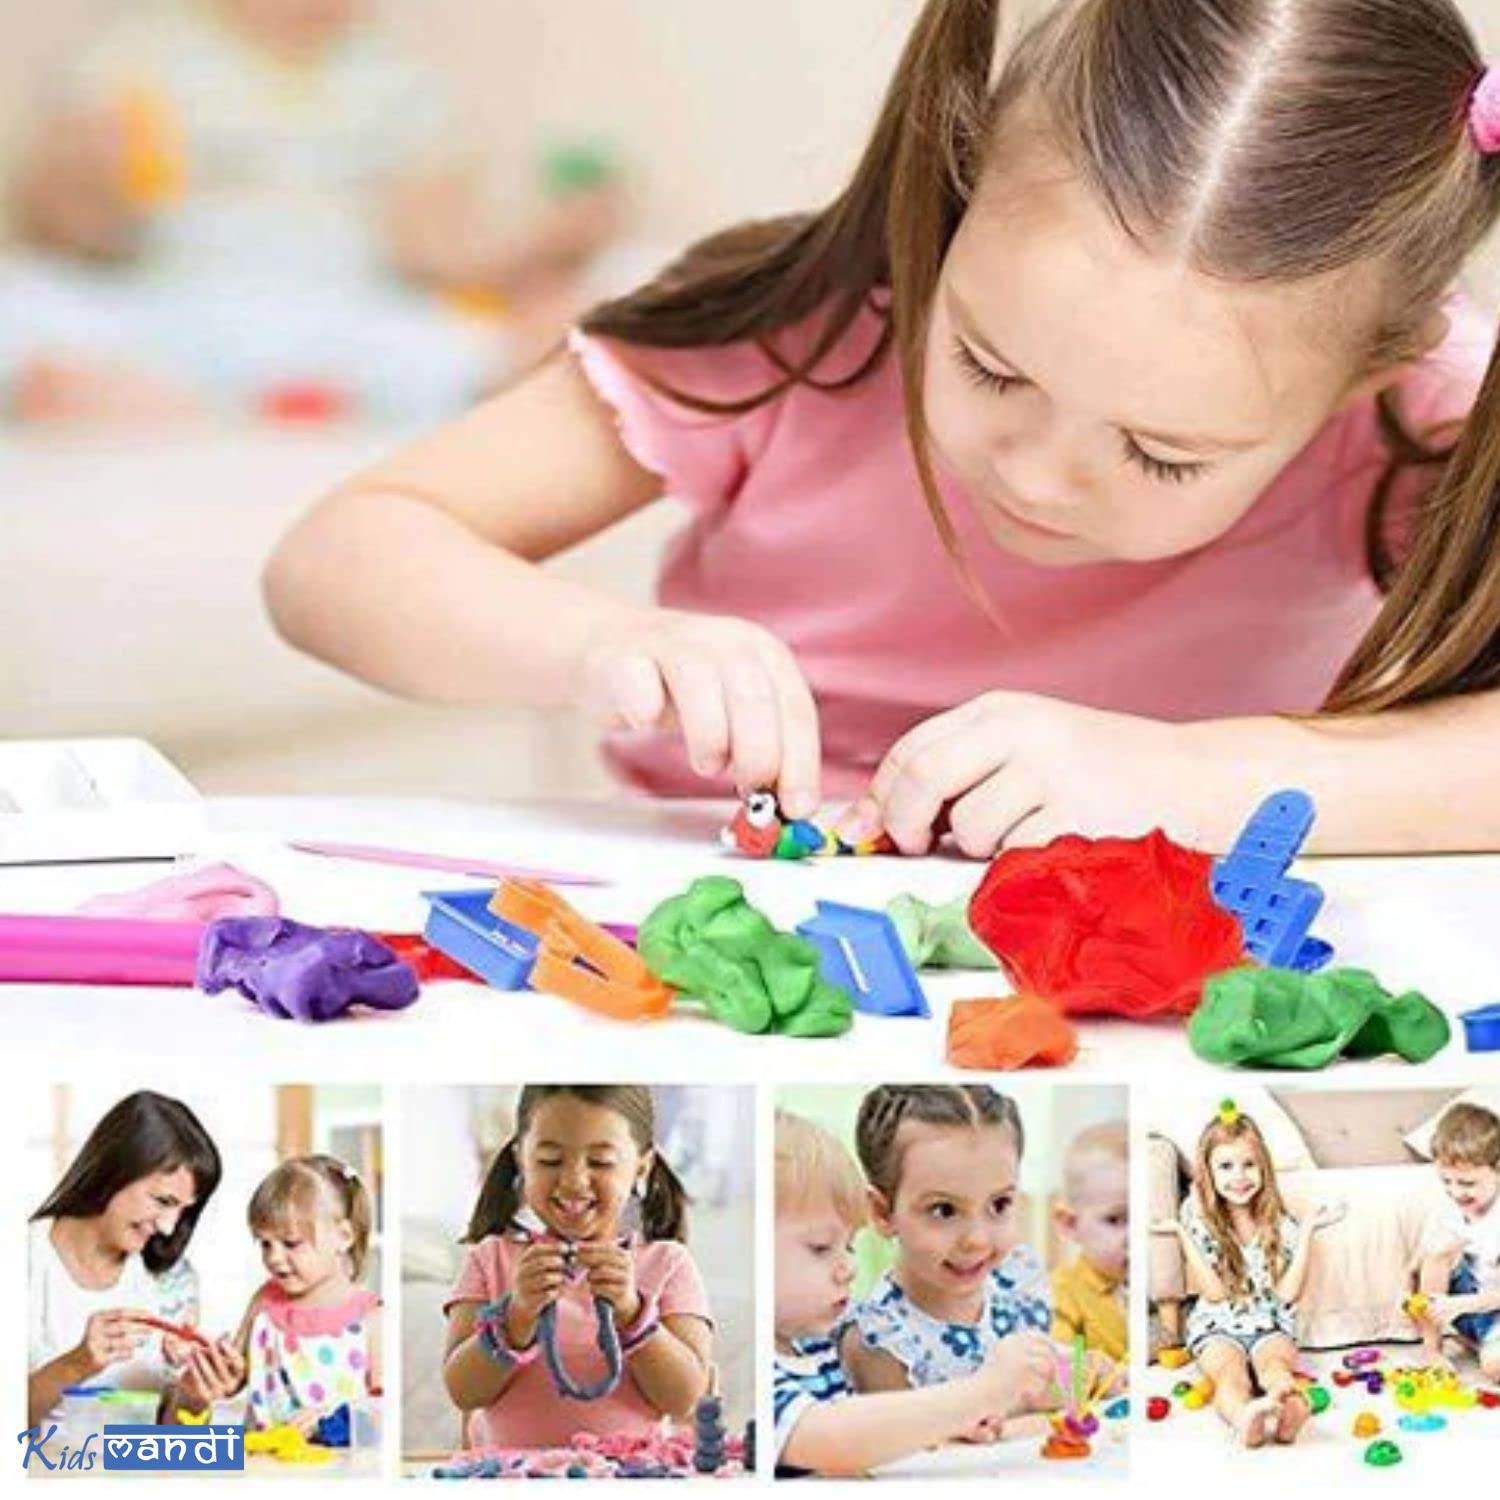 Kids Mandi dough compound case of colors non-toxic assorted ages 2 and up multicolor.